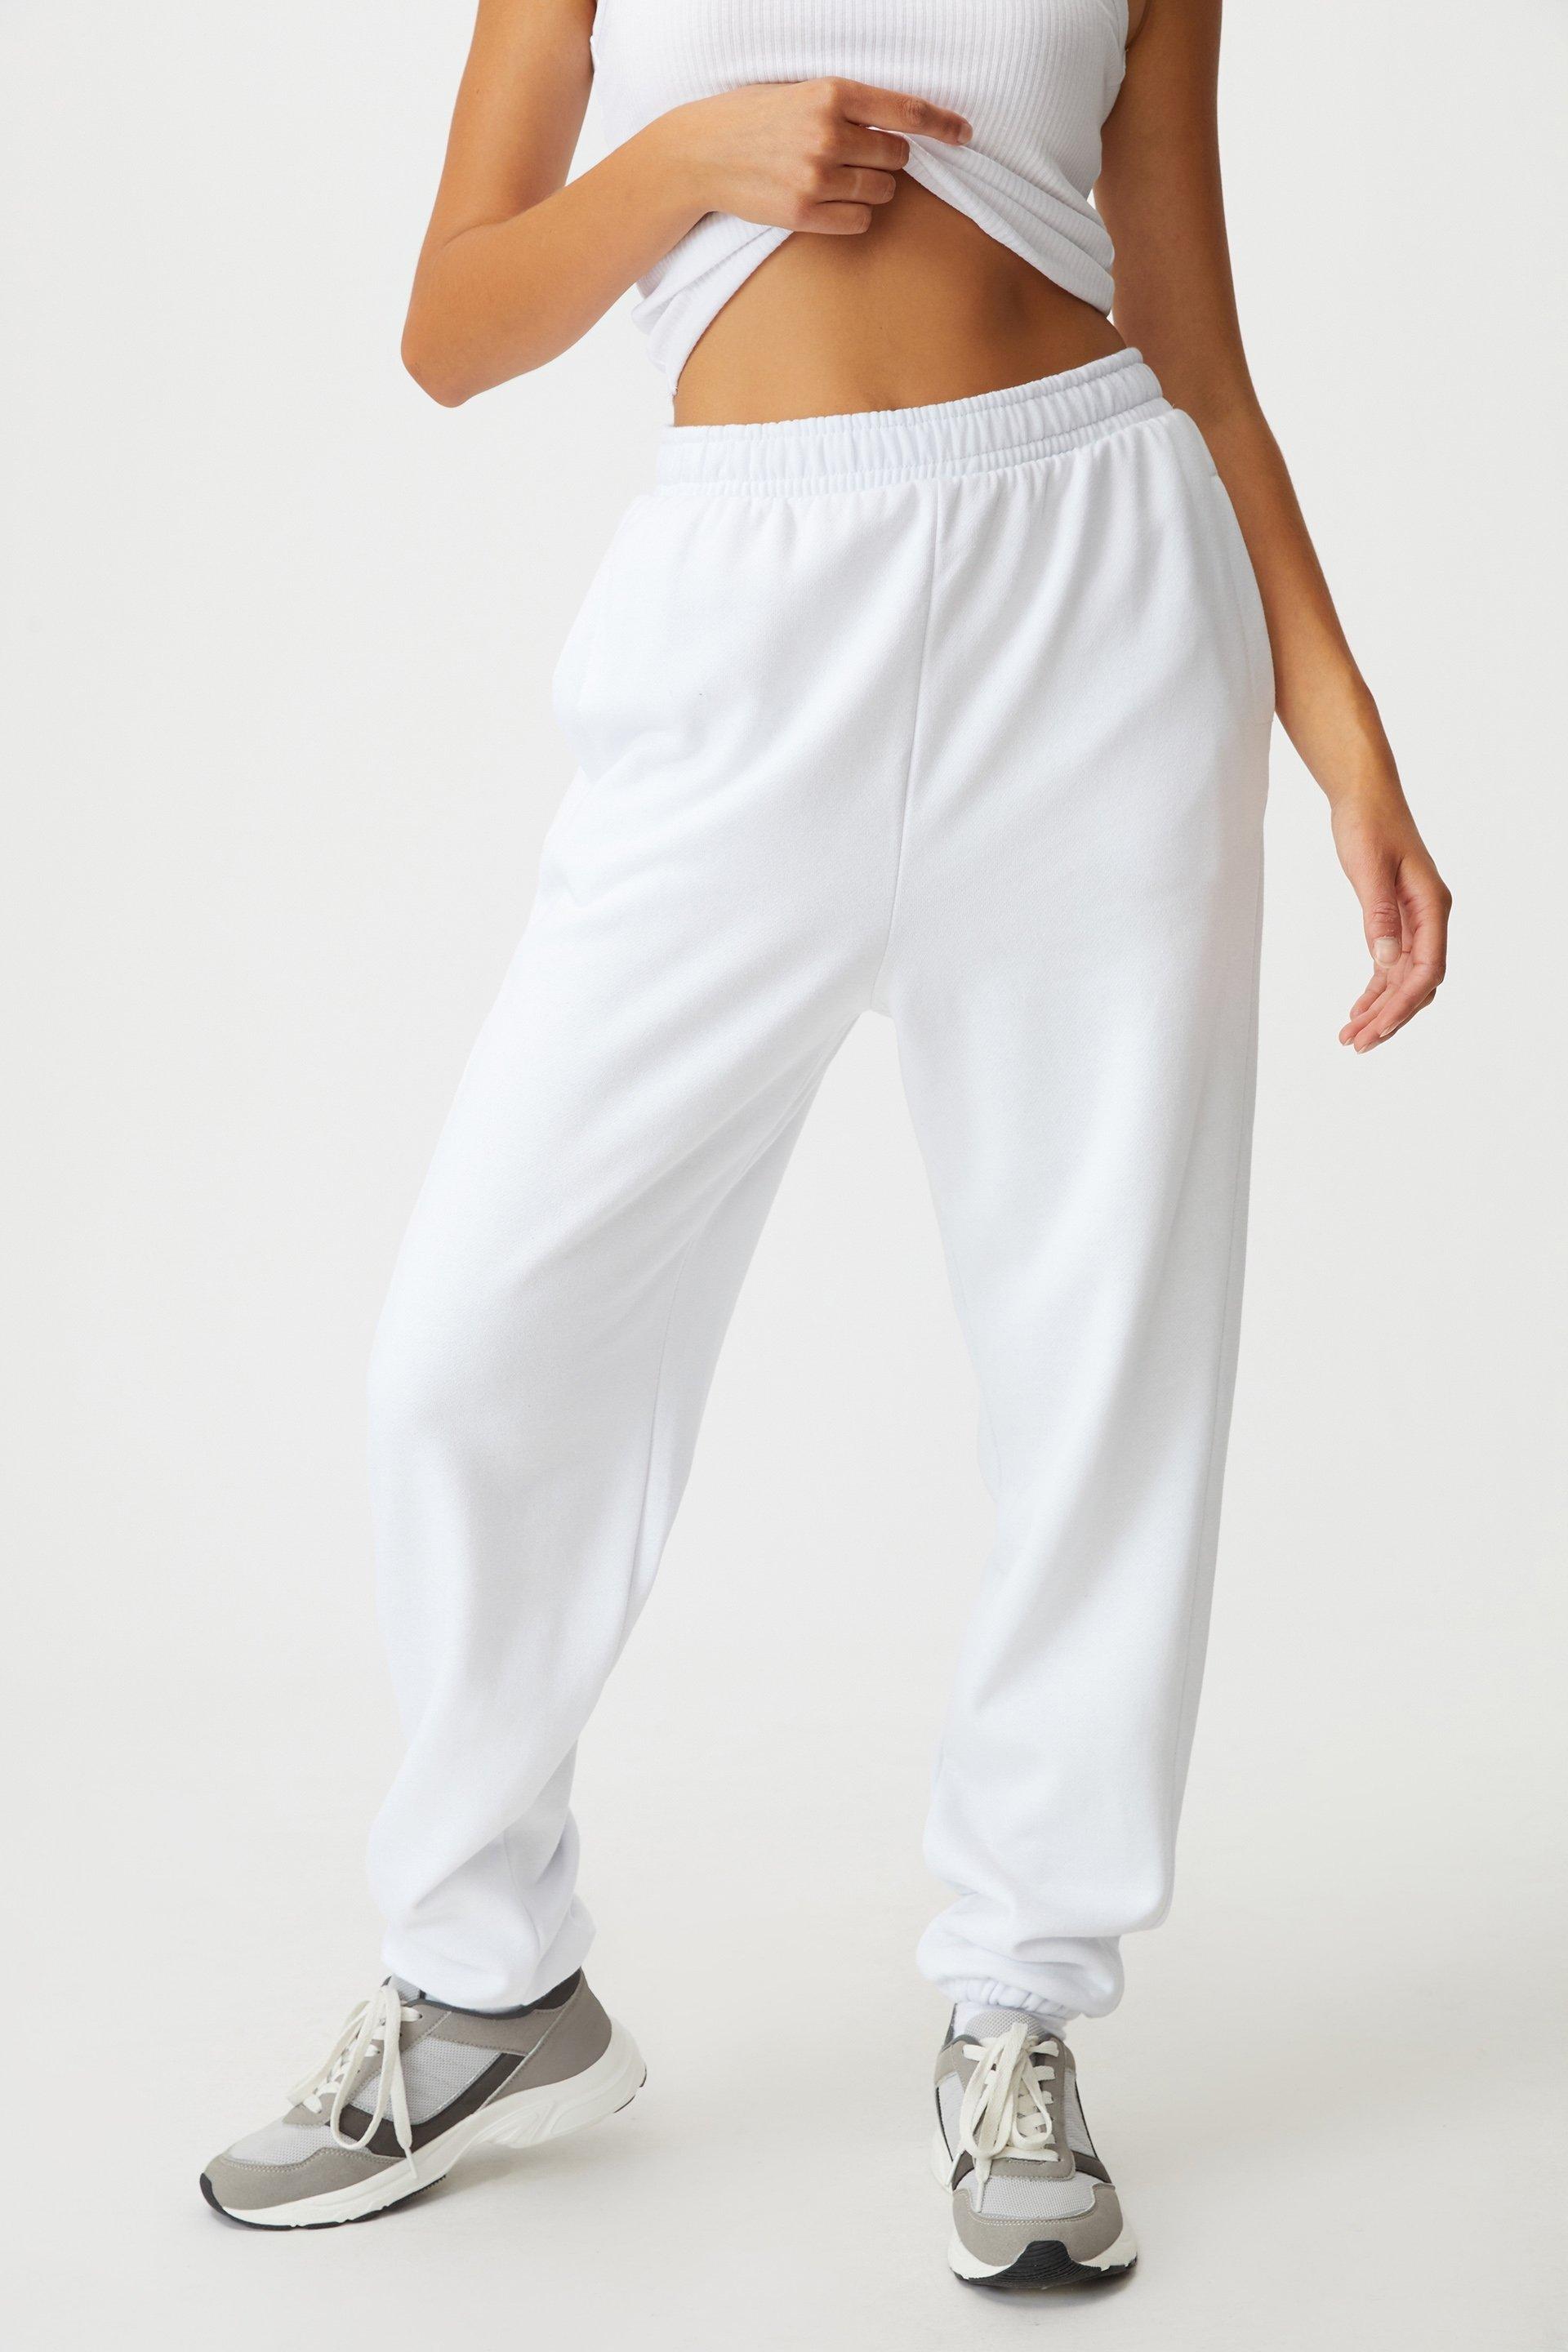 Classic track pants - white Cotton On Trousers | Superbalist.com